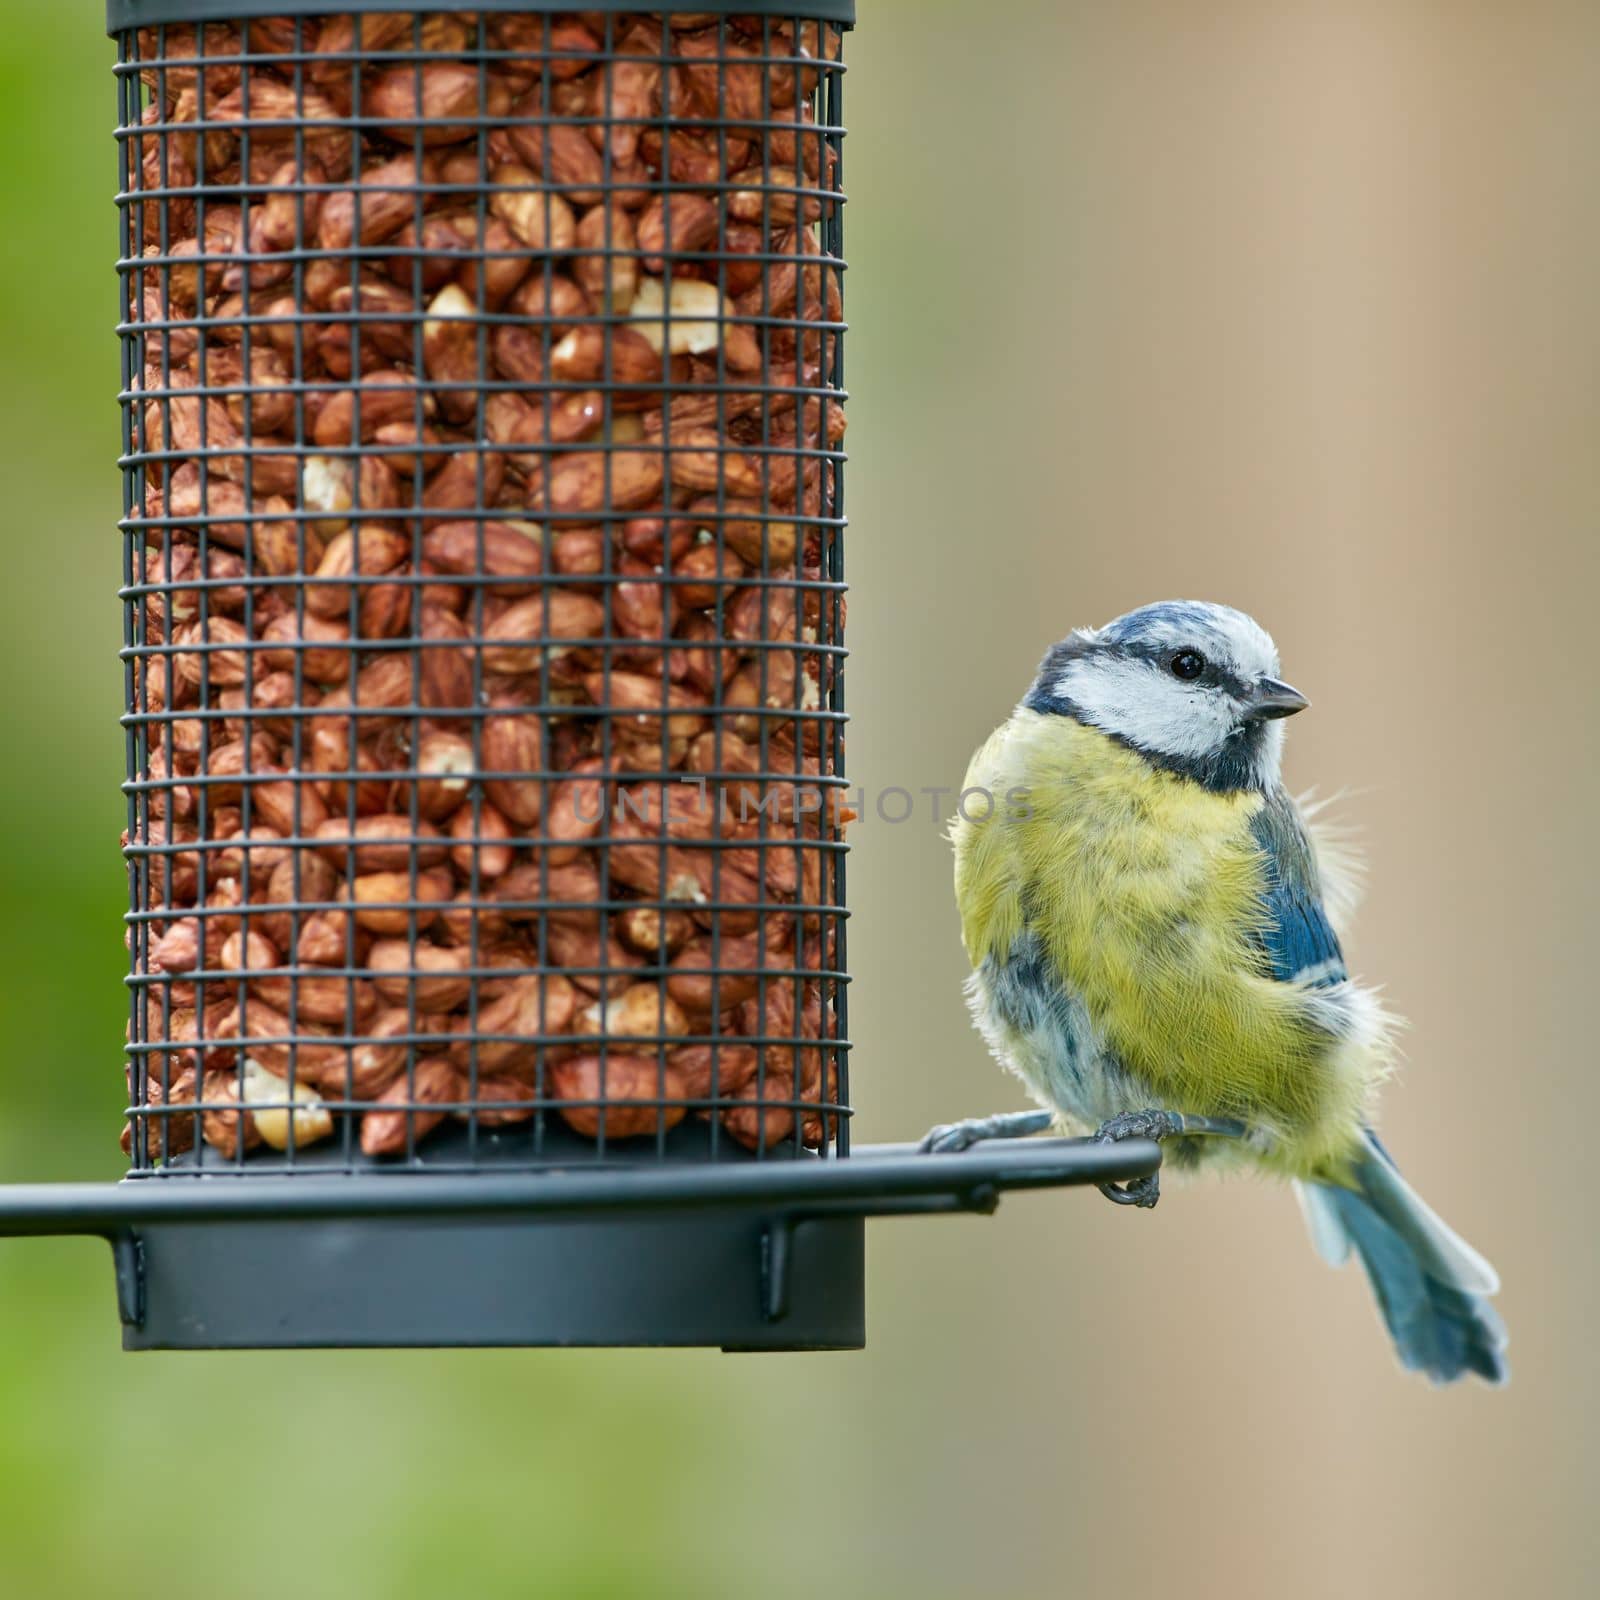 Blue tit. The Eurasian blue tit is a small passerine bird in the tit family Paridae. The bird is easily recognisable by its blue and yellow plumage. by YuriArcurs